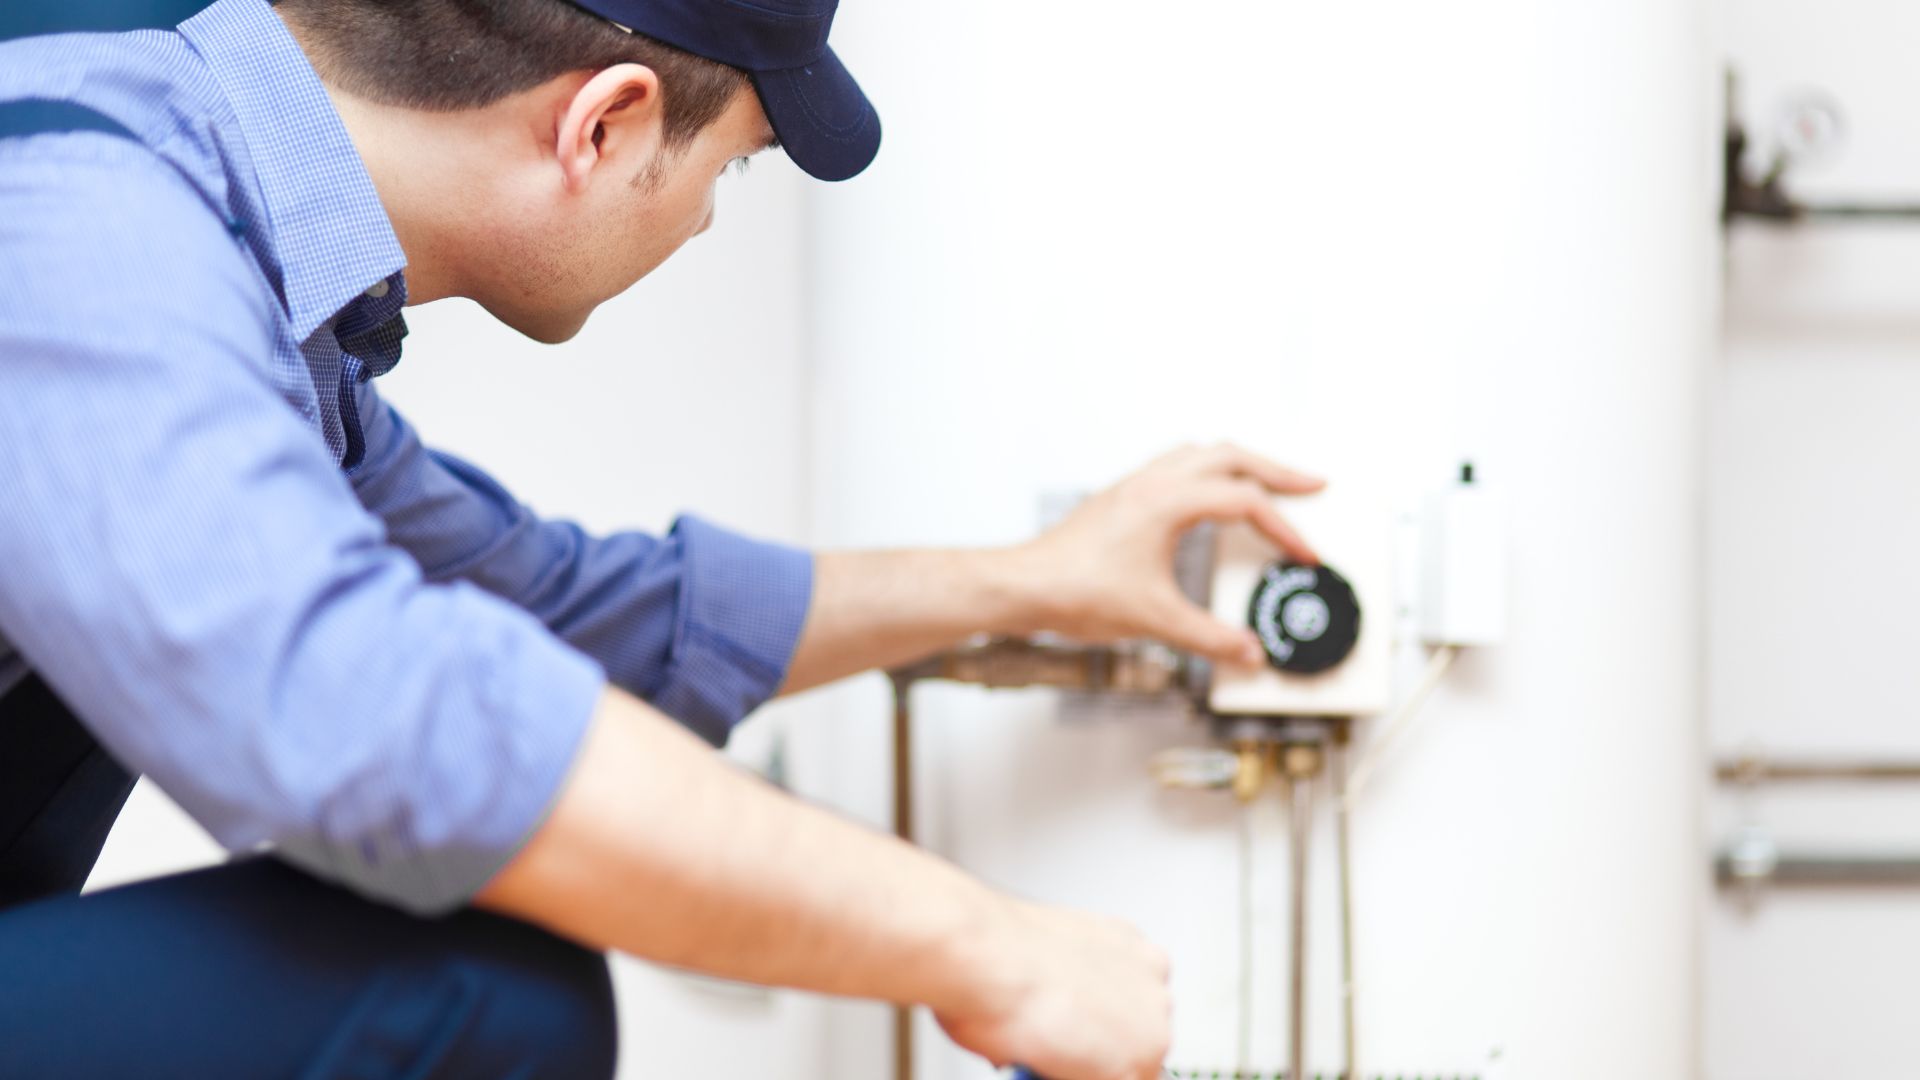 Contact CAN Plumbing and Drainage for All Your Tankless Water Heater Needs with Skilled Plumbers